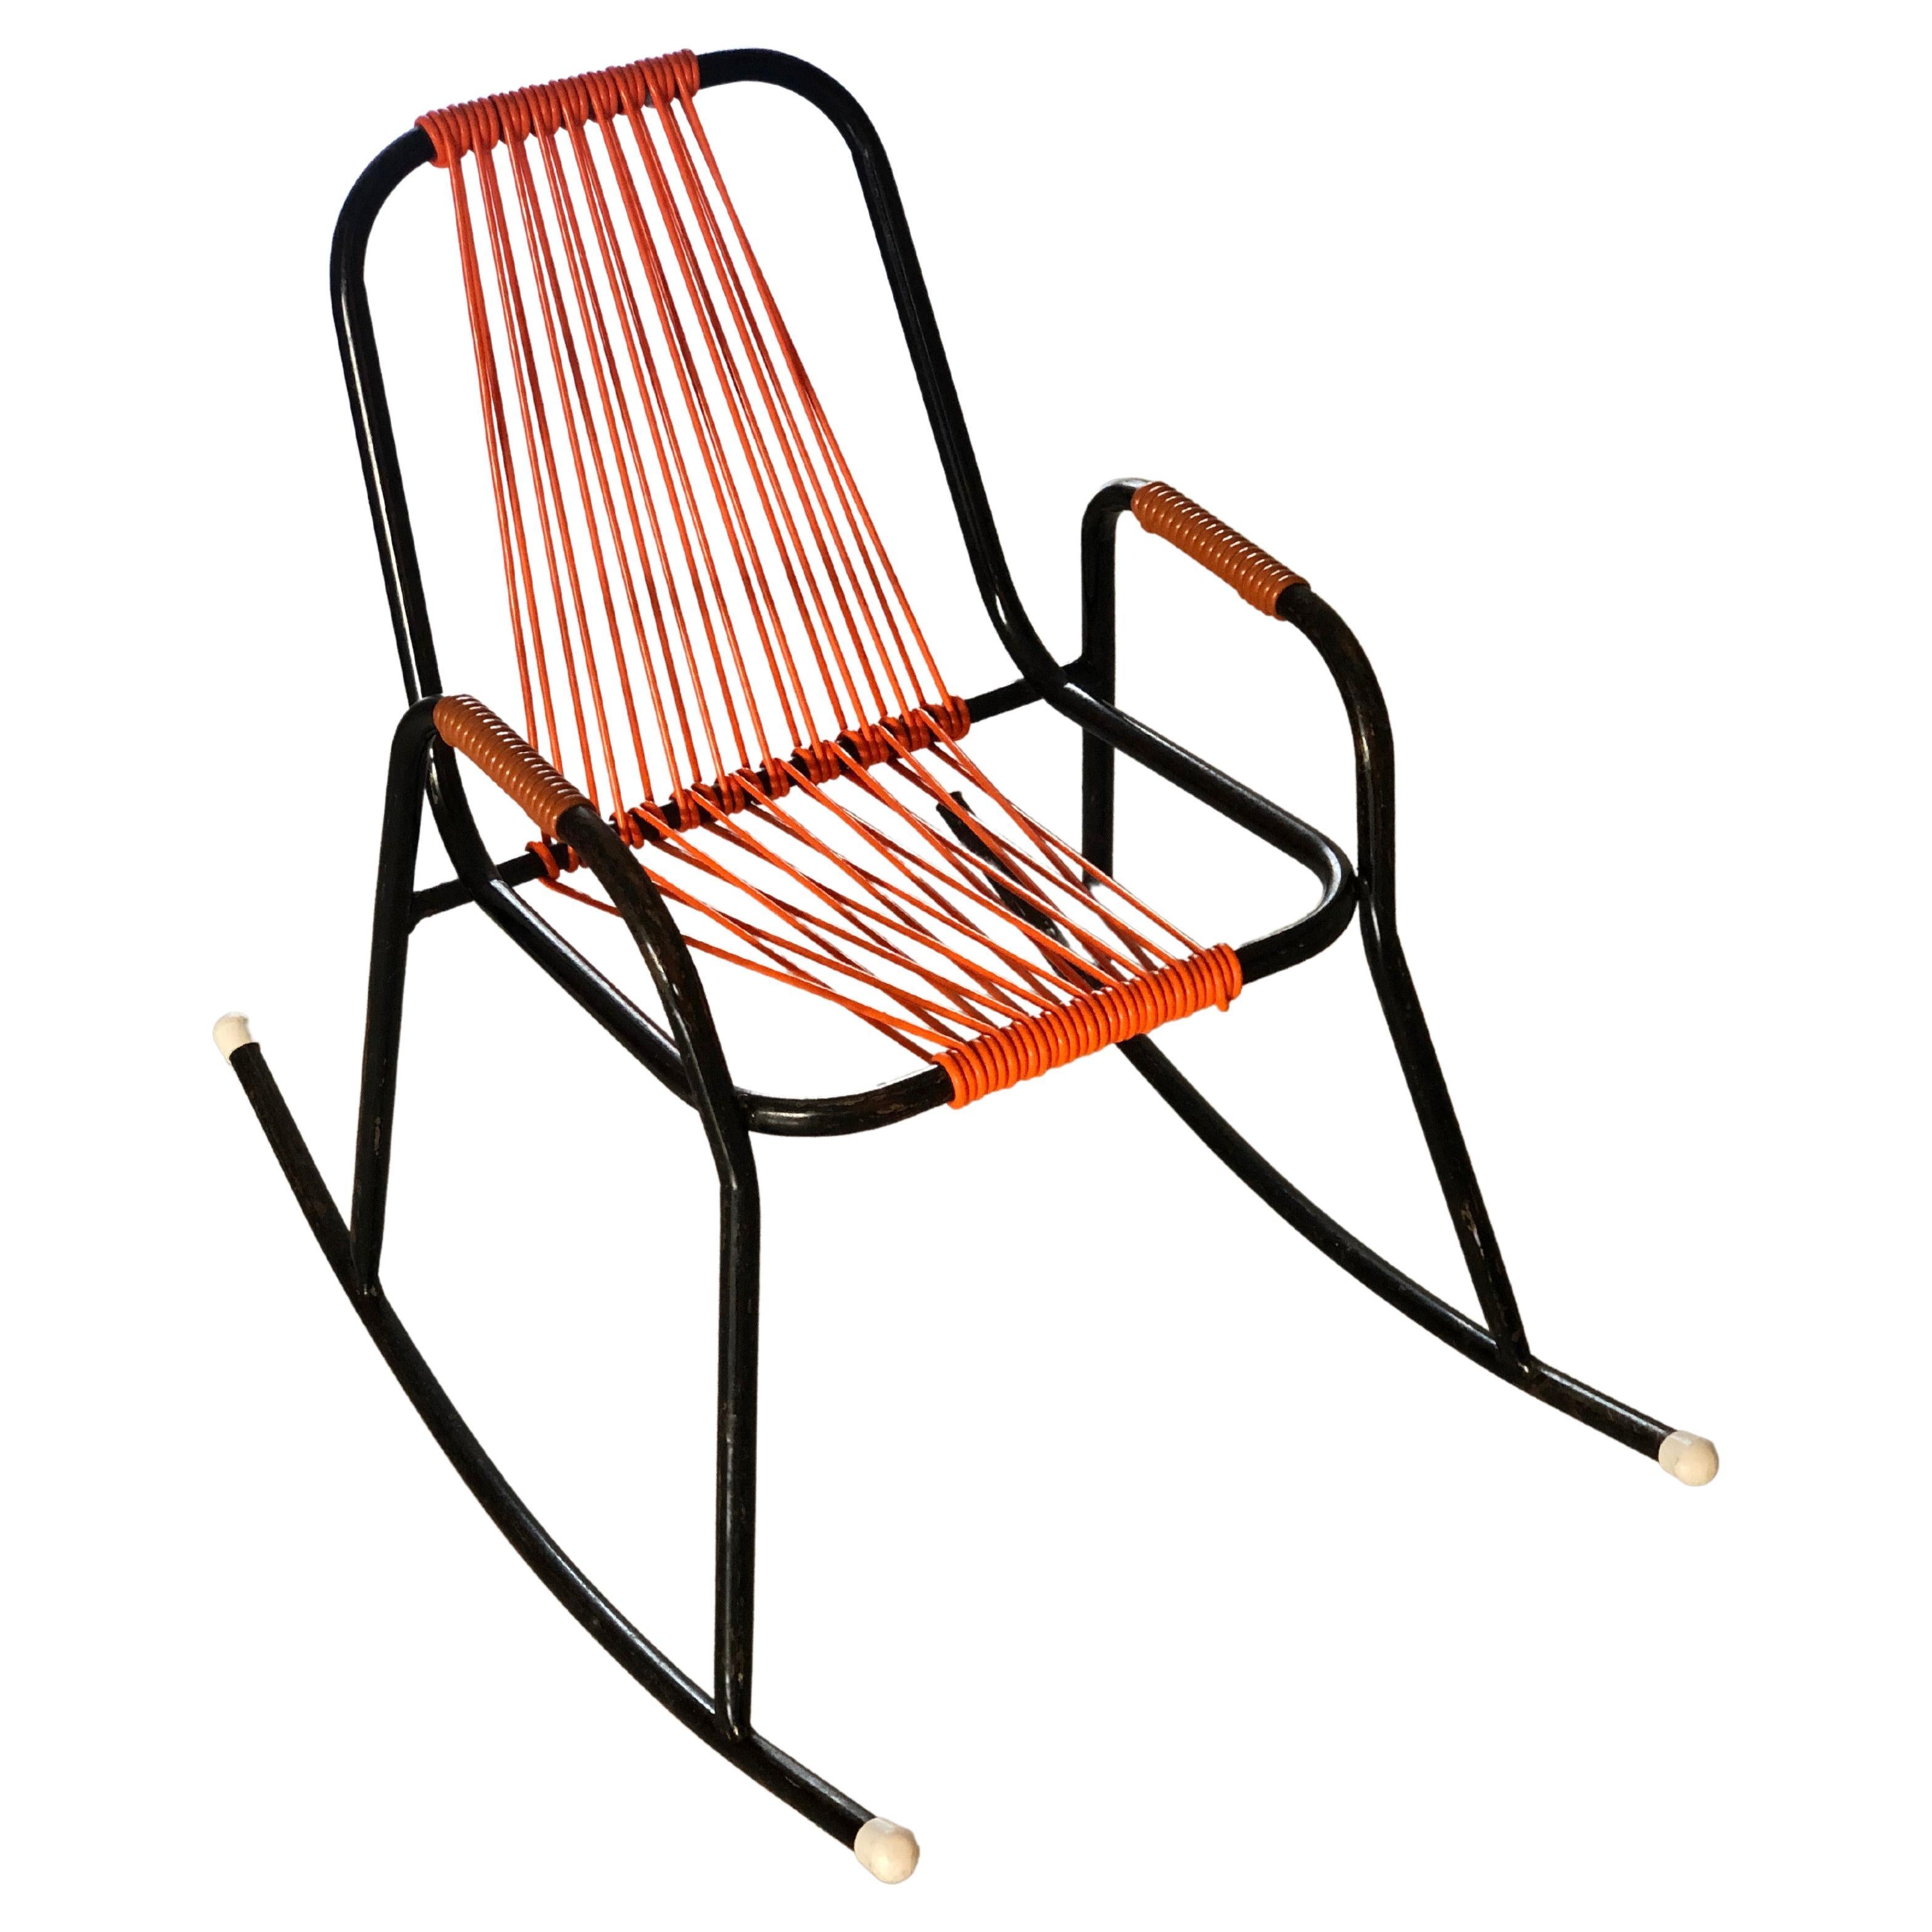 Children's Rocking Armchair scoubidou Torck - 1950's
Cute little Vintage Rocking Armchair for children from the fifties. Black tubaler metal frame, and seat, backrest and armrests in scoubidou orange plastic wire. Special model. 

Torck was founded